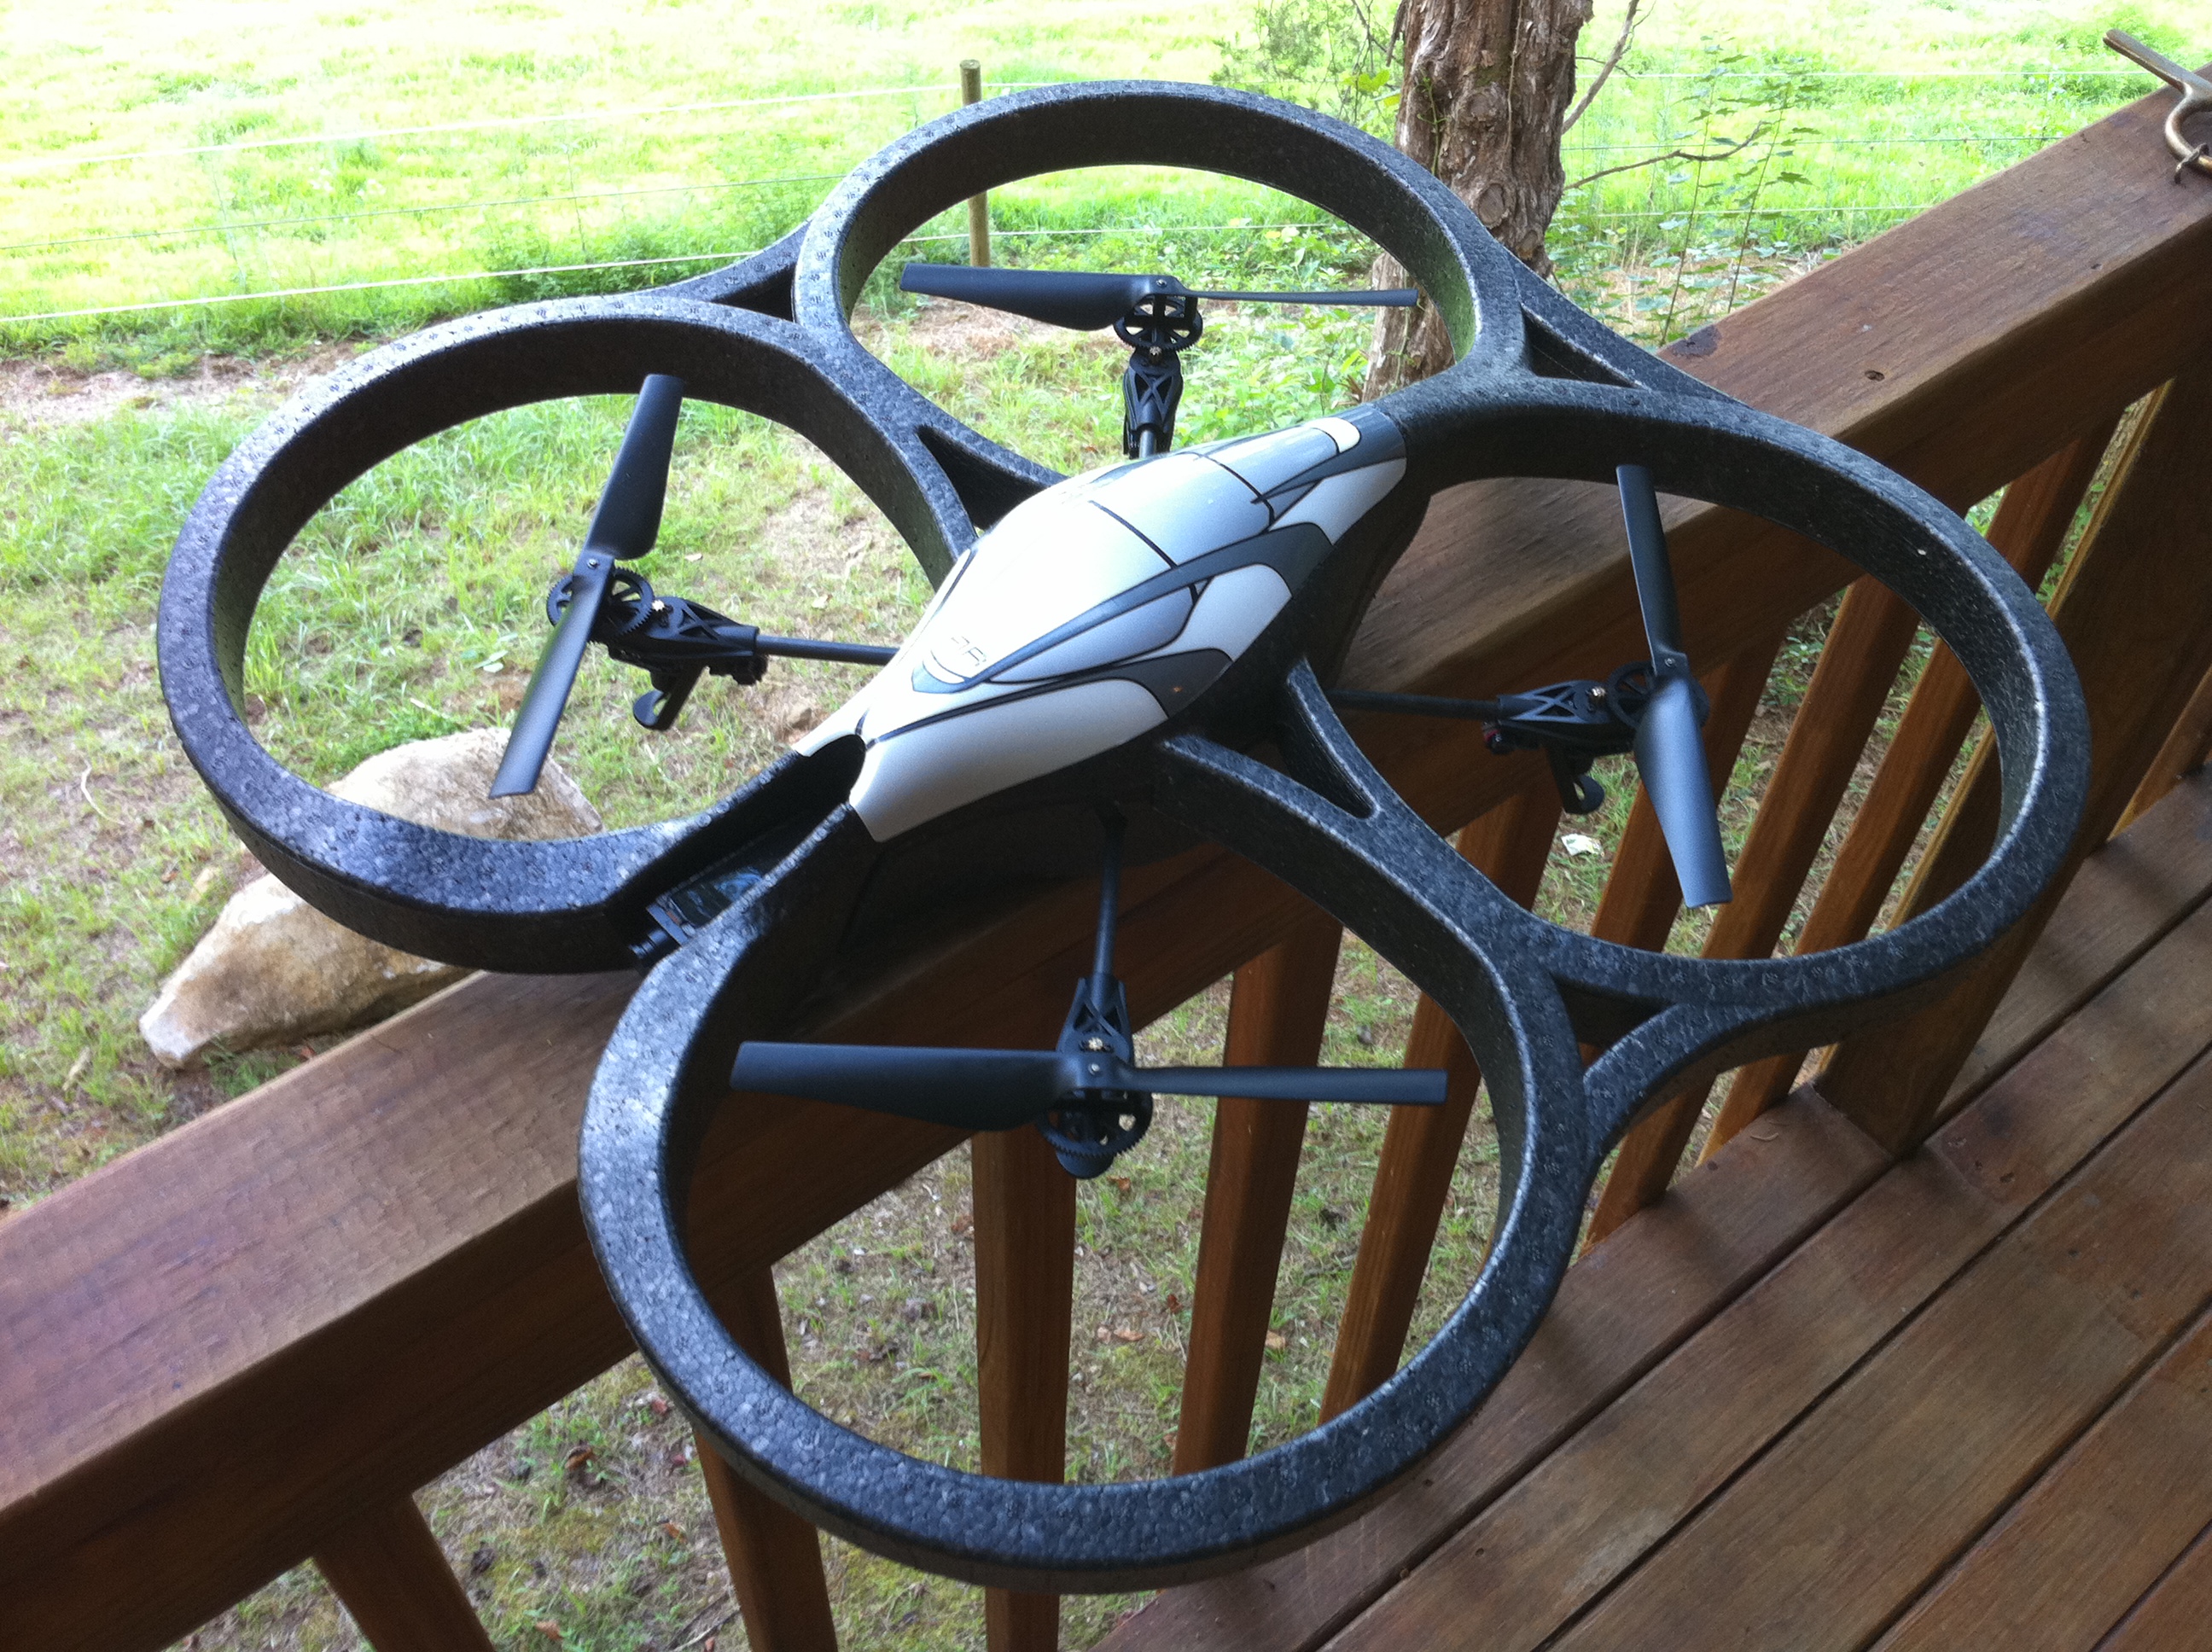 Parrot AR.Drone Review – The Coolest RC Toy I've Played With 